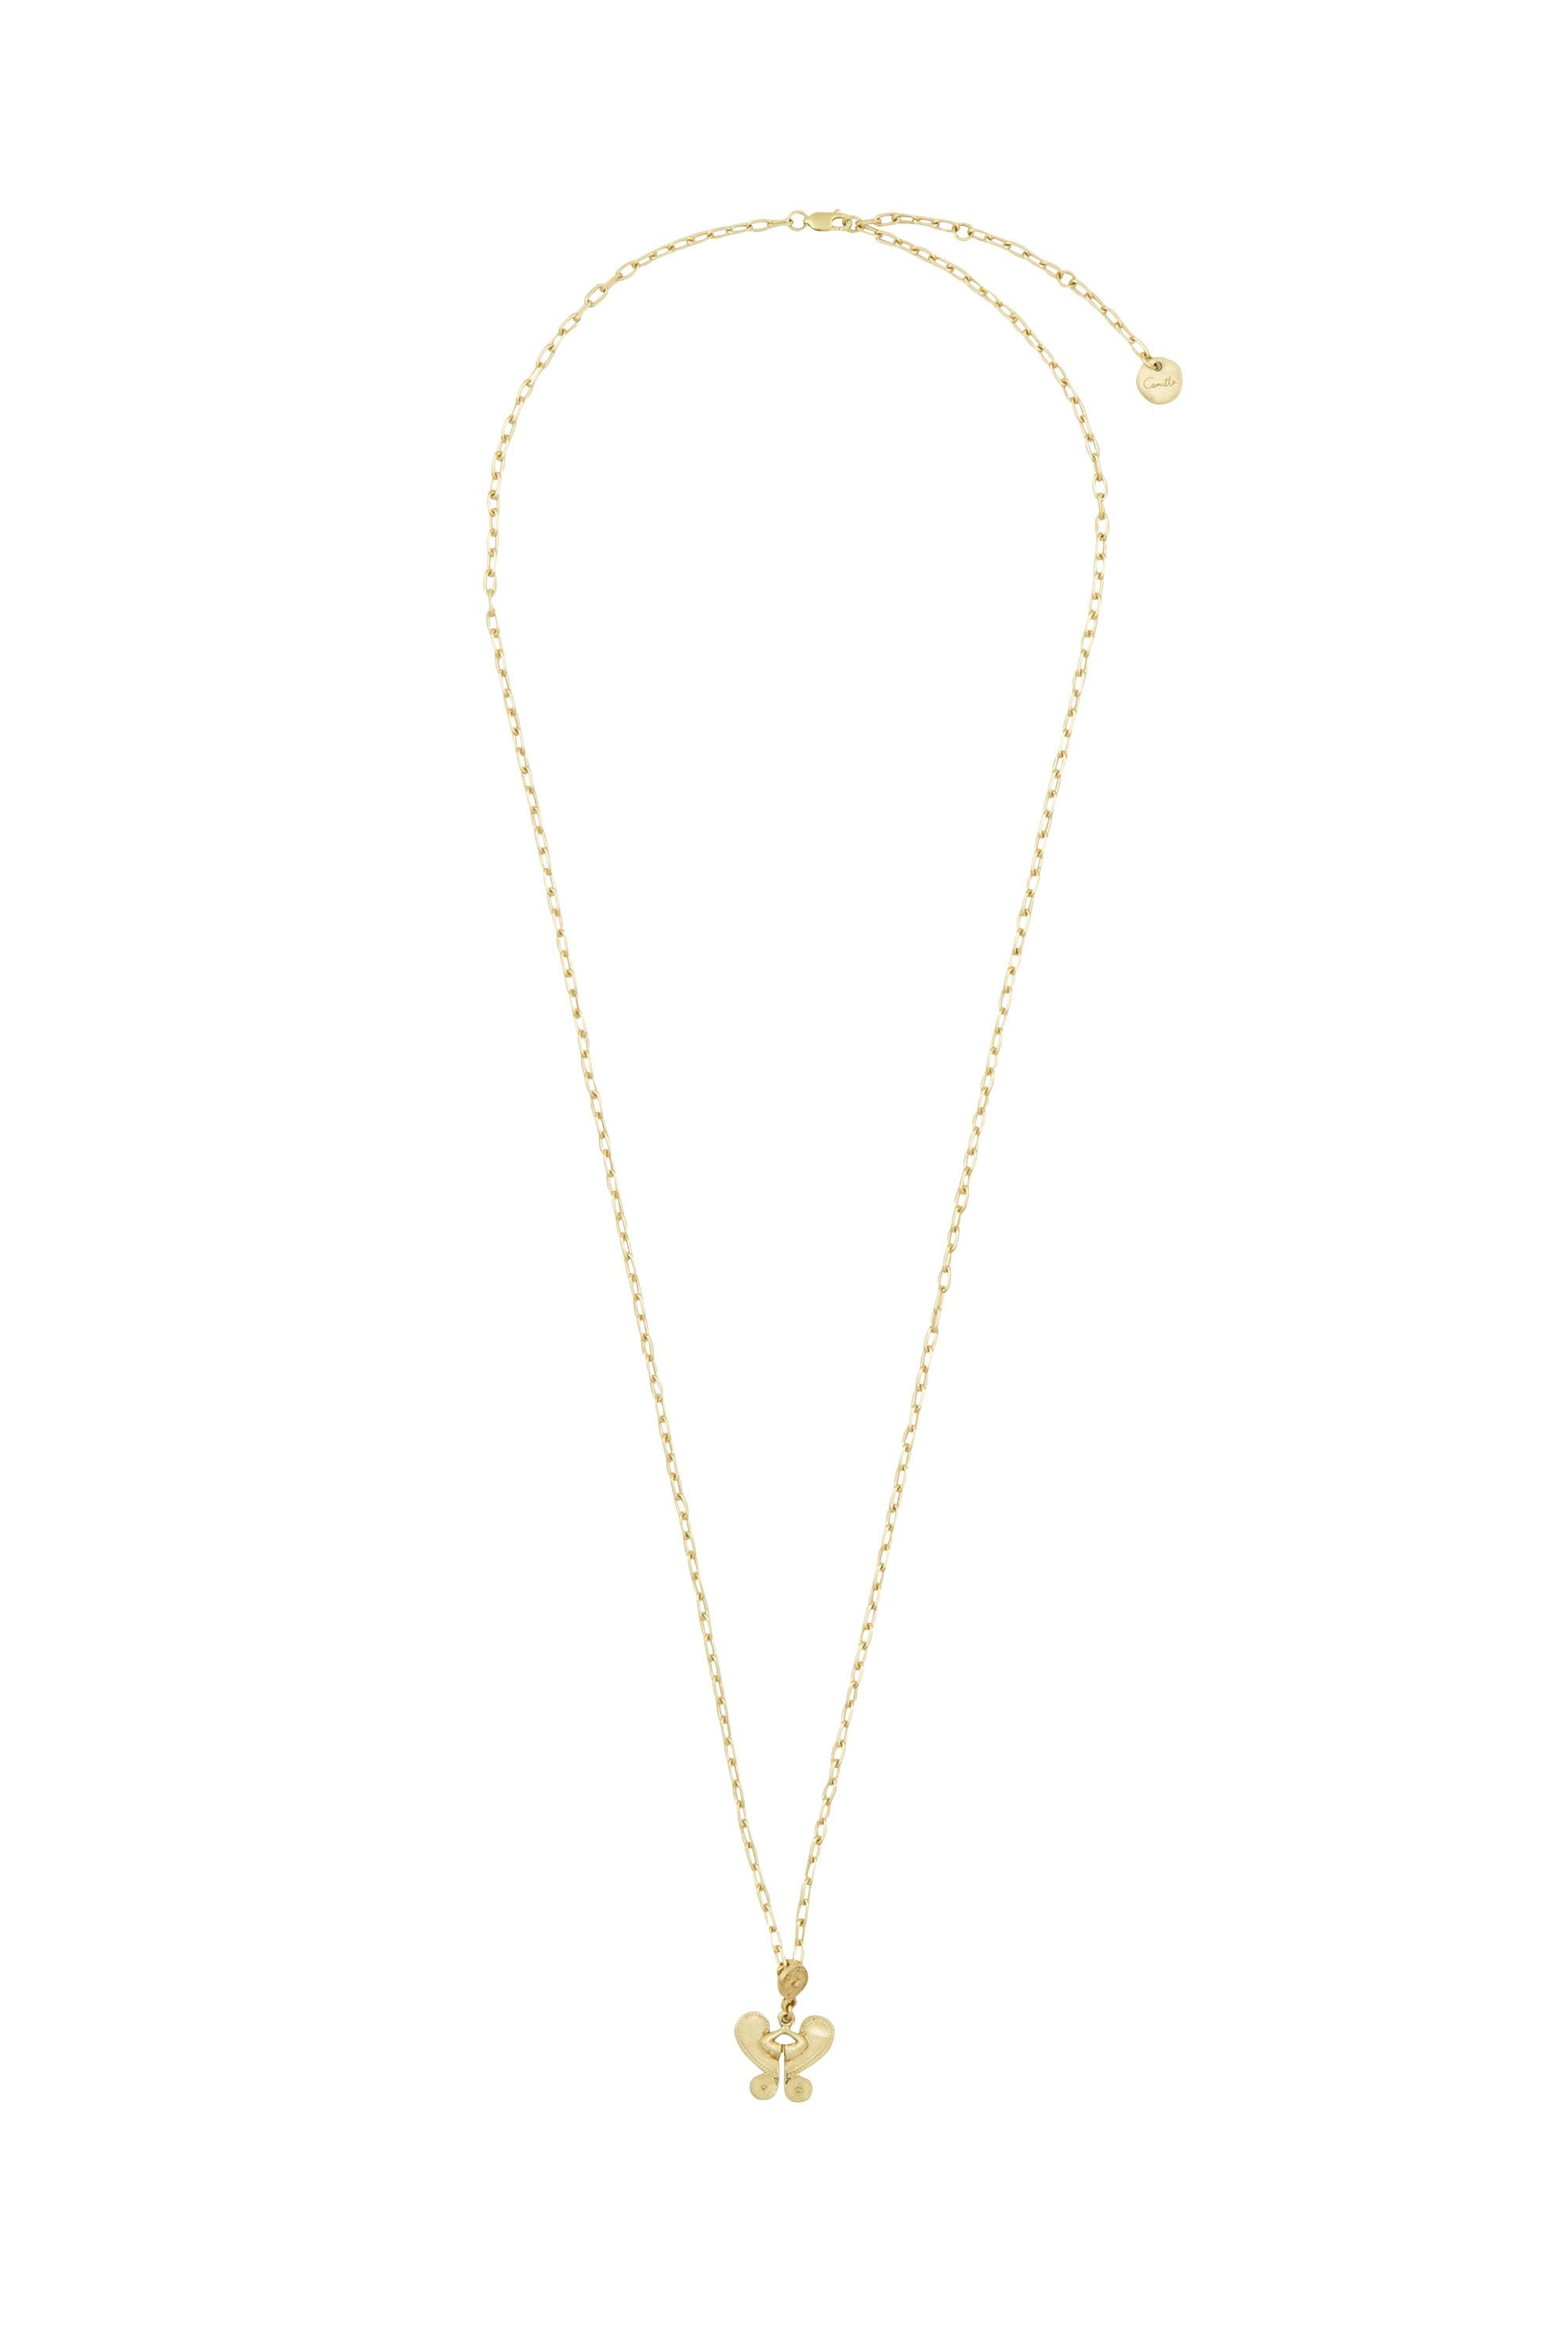 GOLD BRASS ETCHED MOTIF NECKLACE